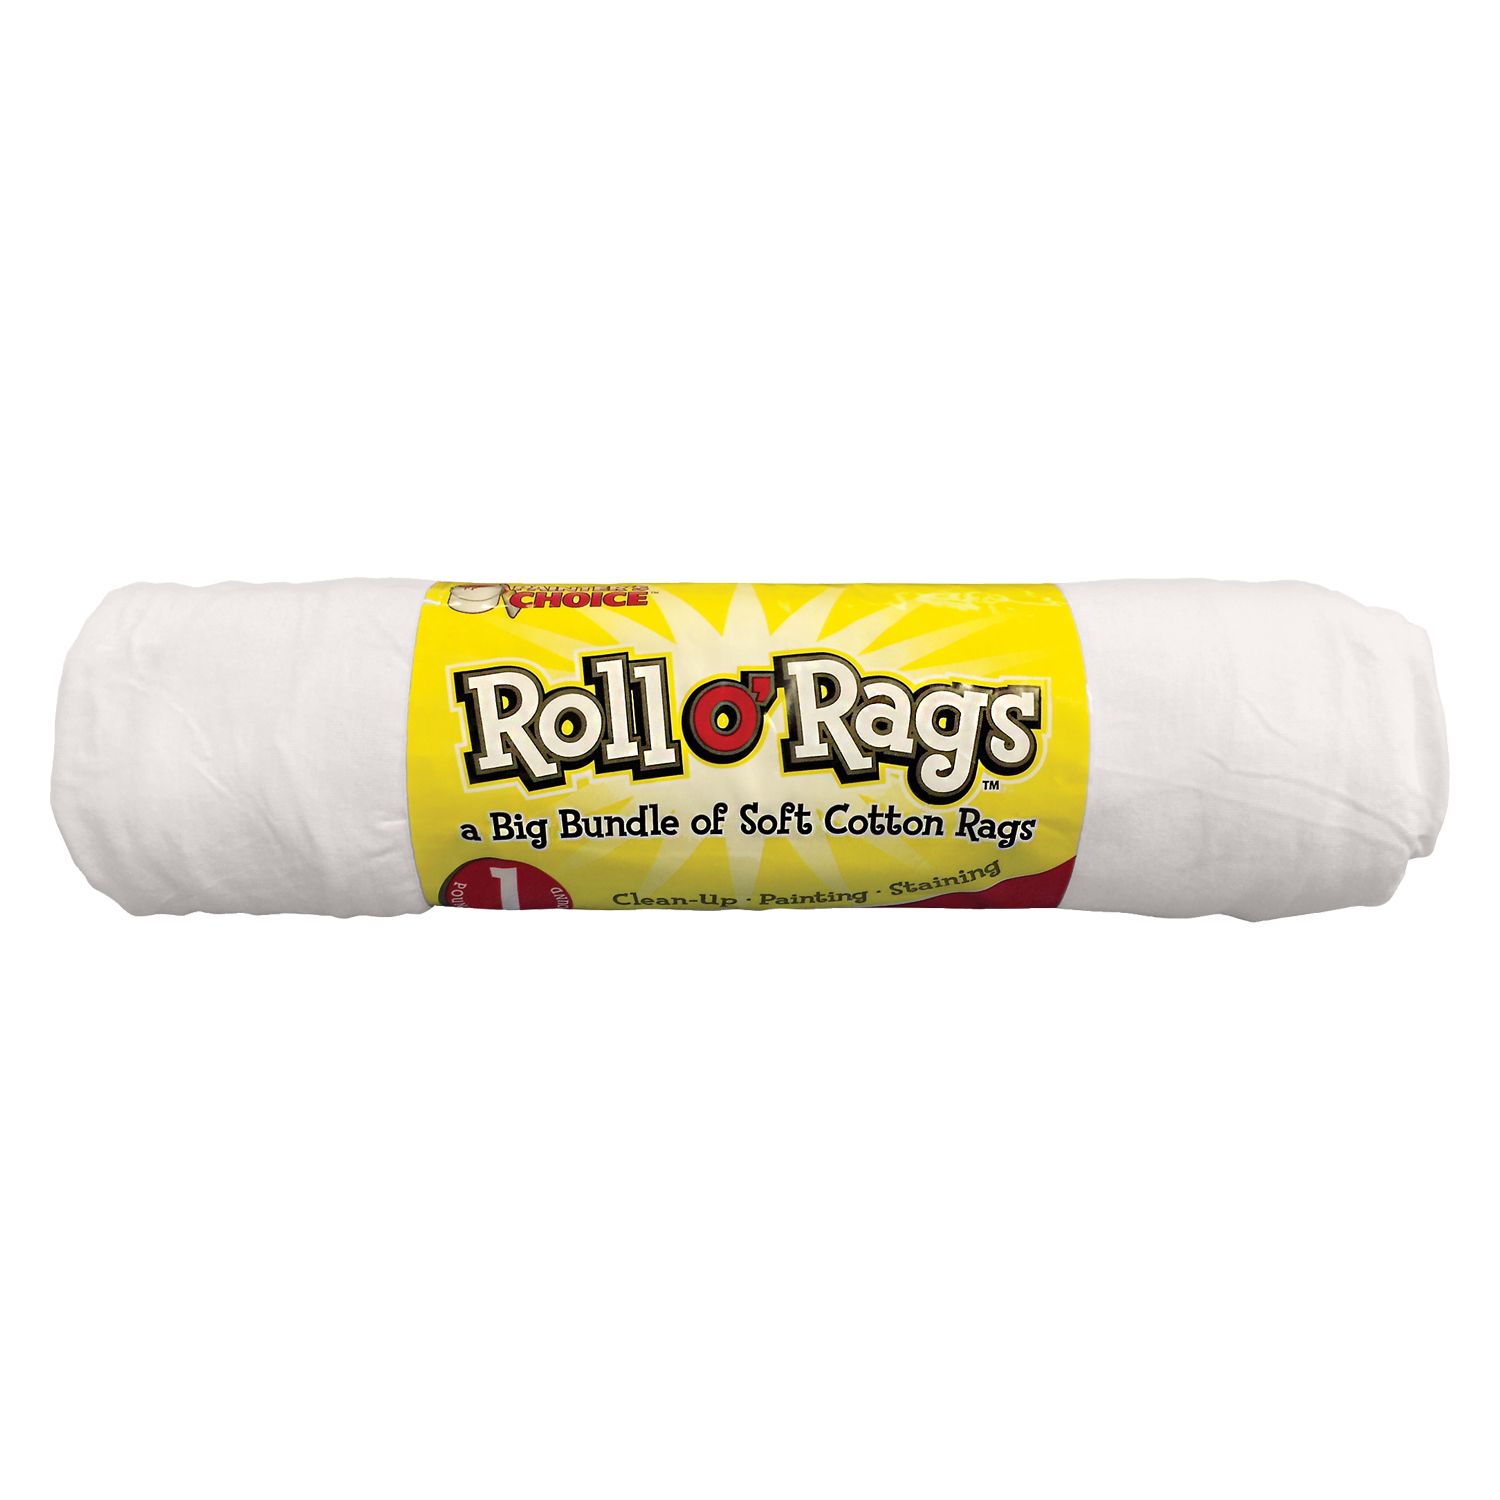 1 lb. Roll of White Cotton Knit Rags